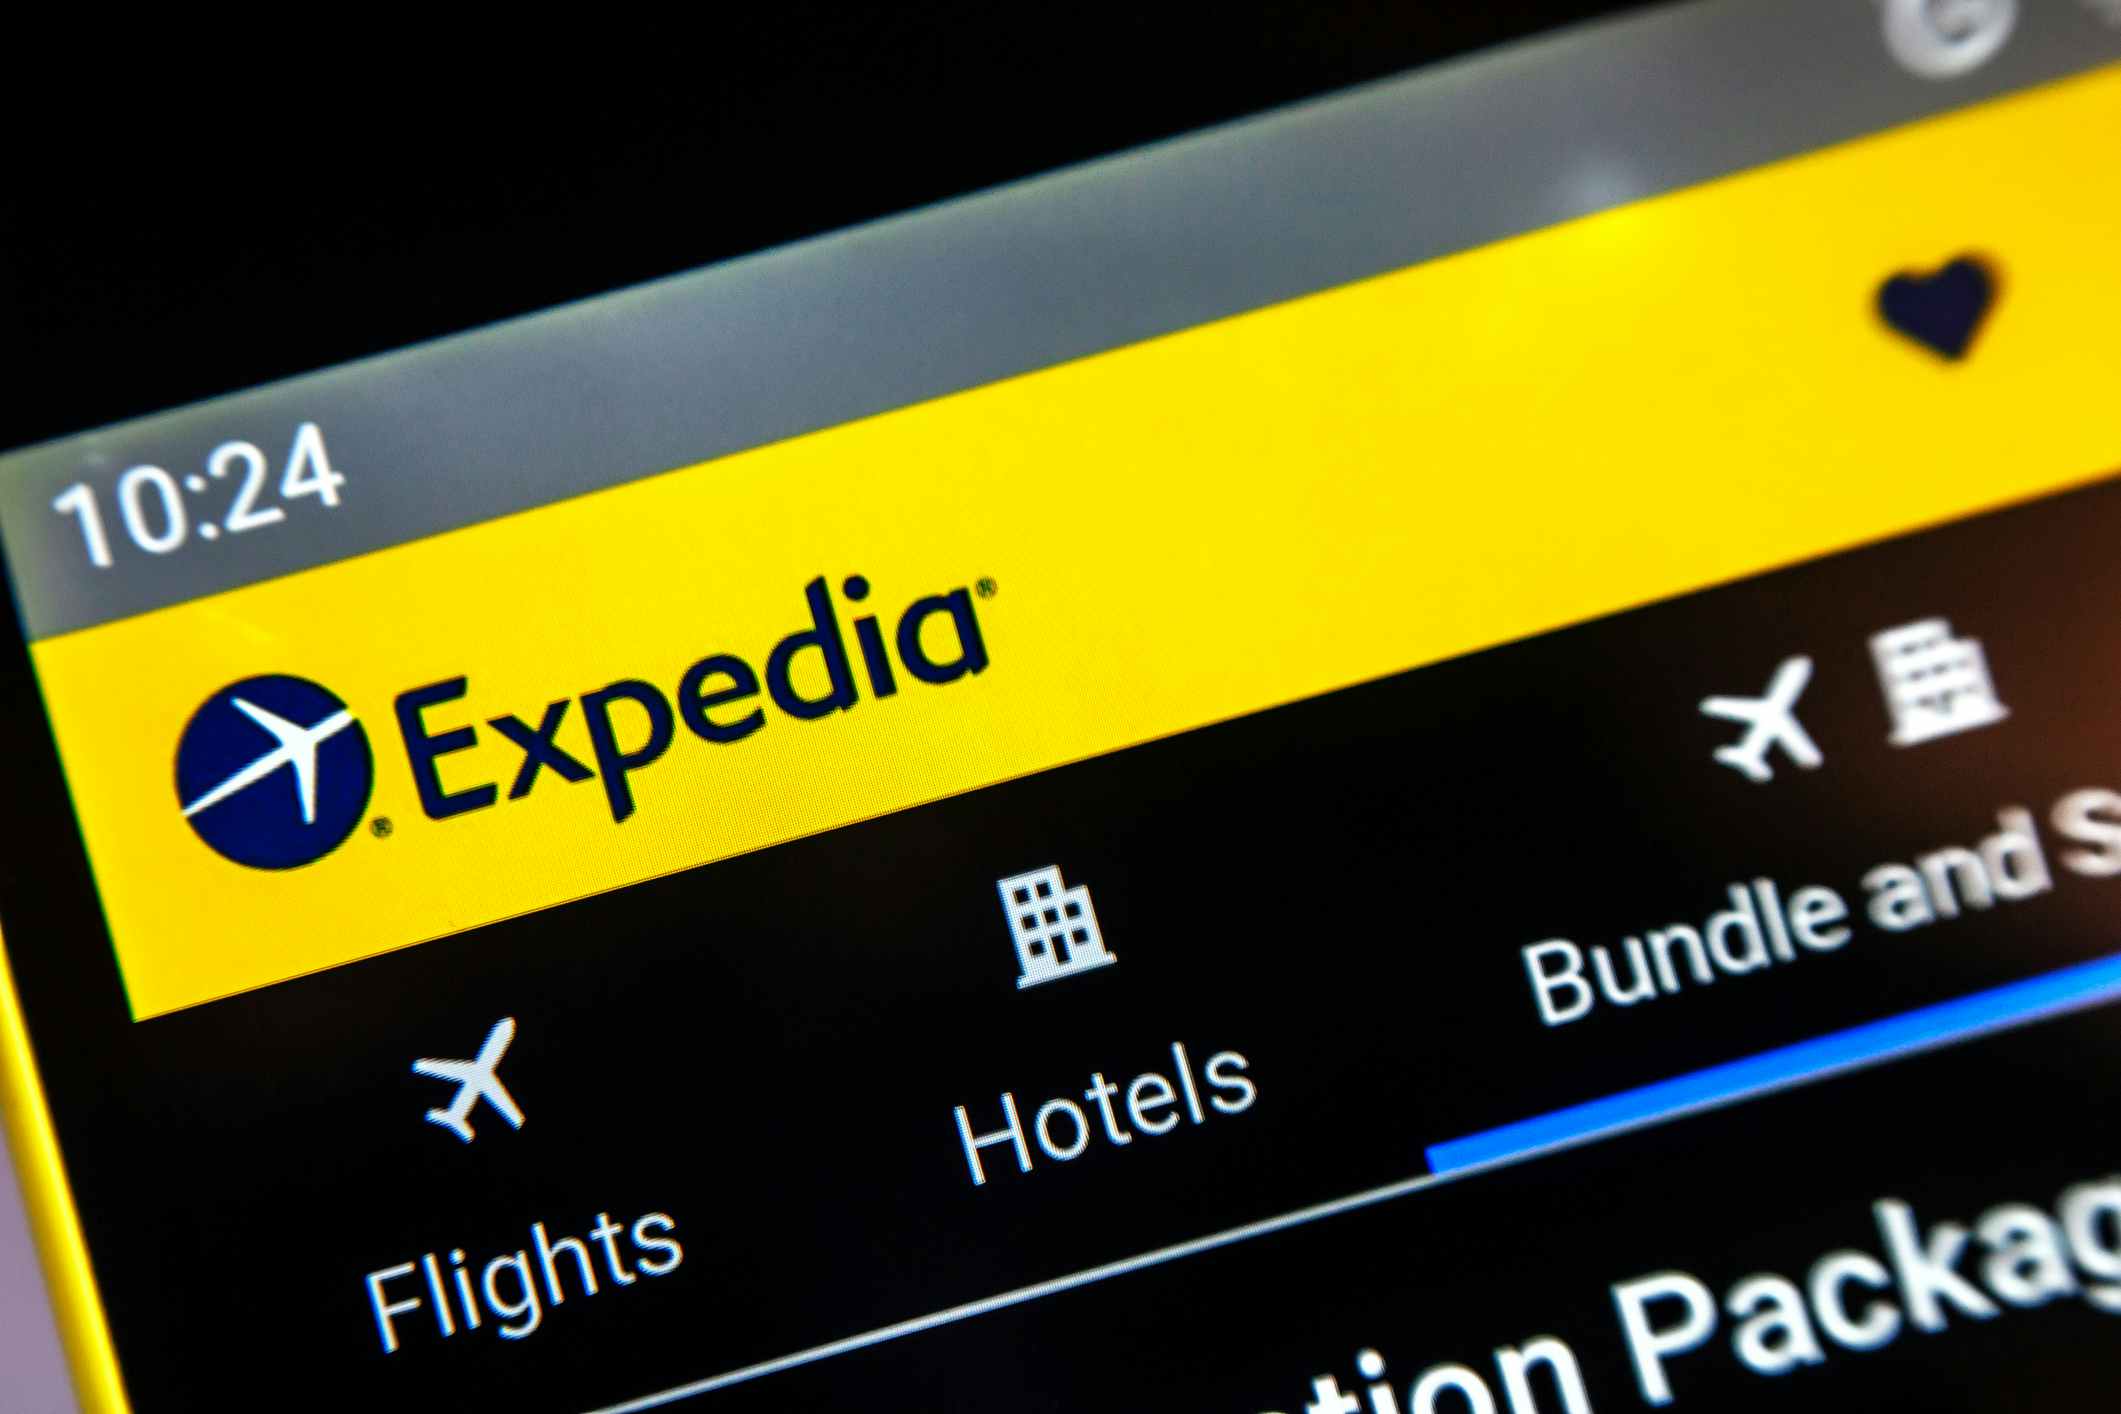 expedia home screen showing rental car hotel bundle button